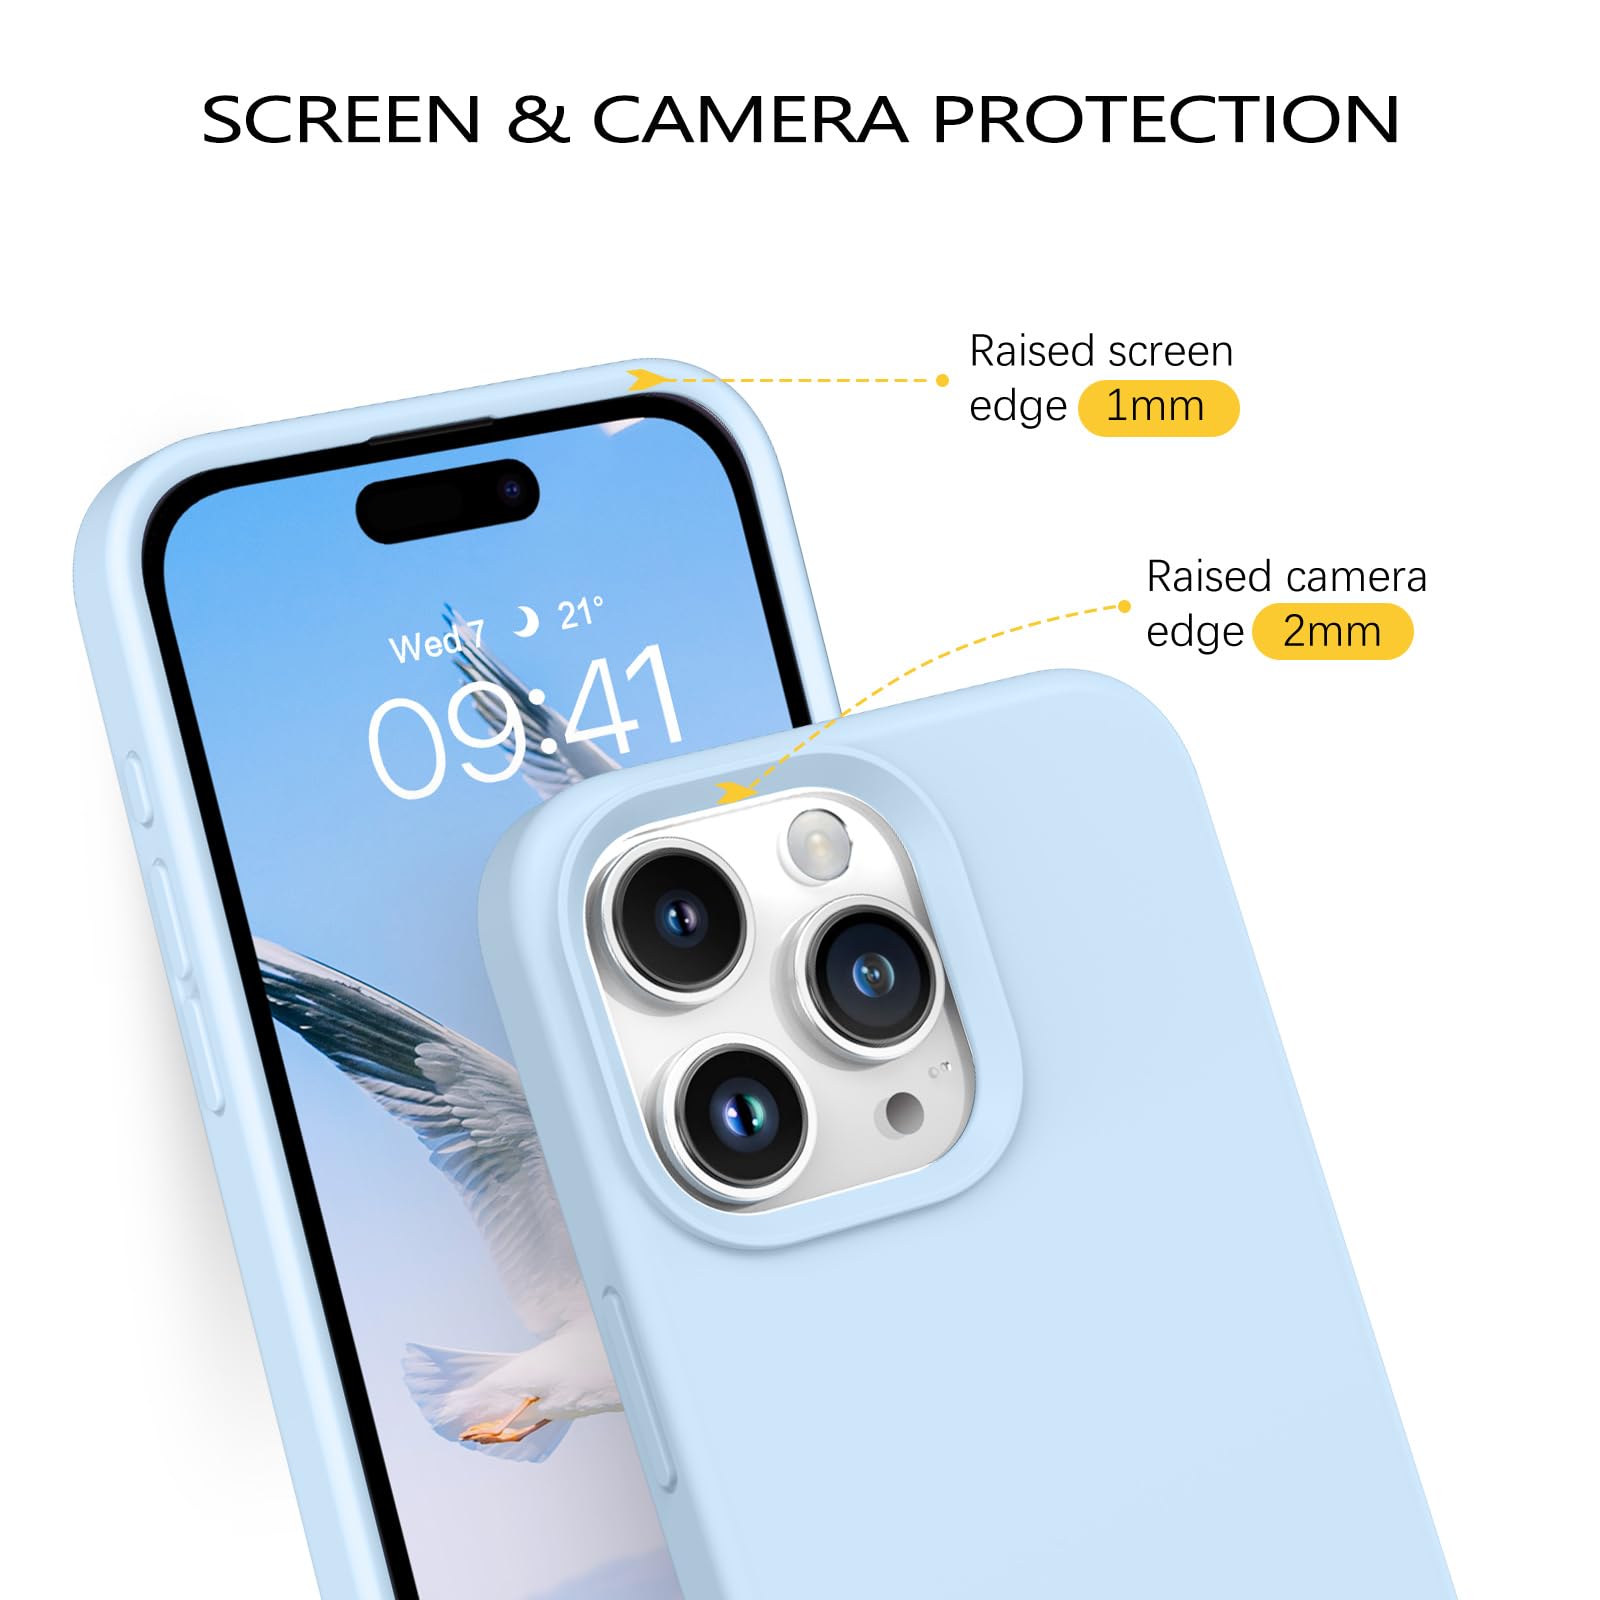 GUAGUA Compatible with iPhone 15 Pro Max Case 6.7 Inch Liquid Silicone Soft Gel Rubber Slim Microfiber Lining Cushion Texture Cover Shockproof Protective Case for iPhone 15 Pro Max, Light Blue